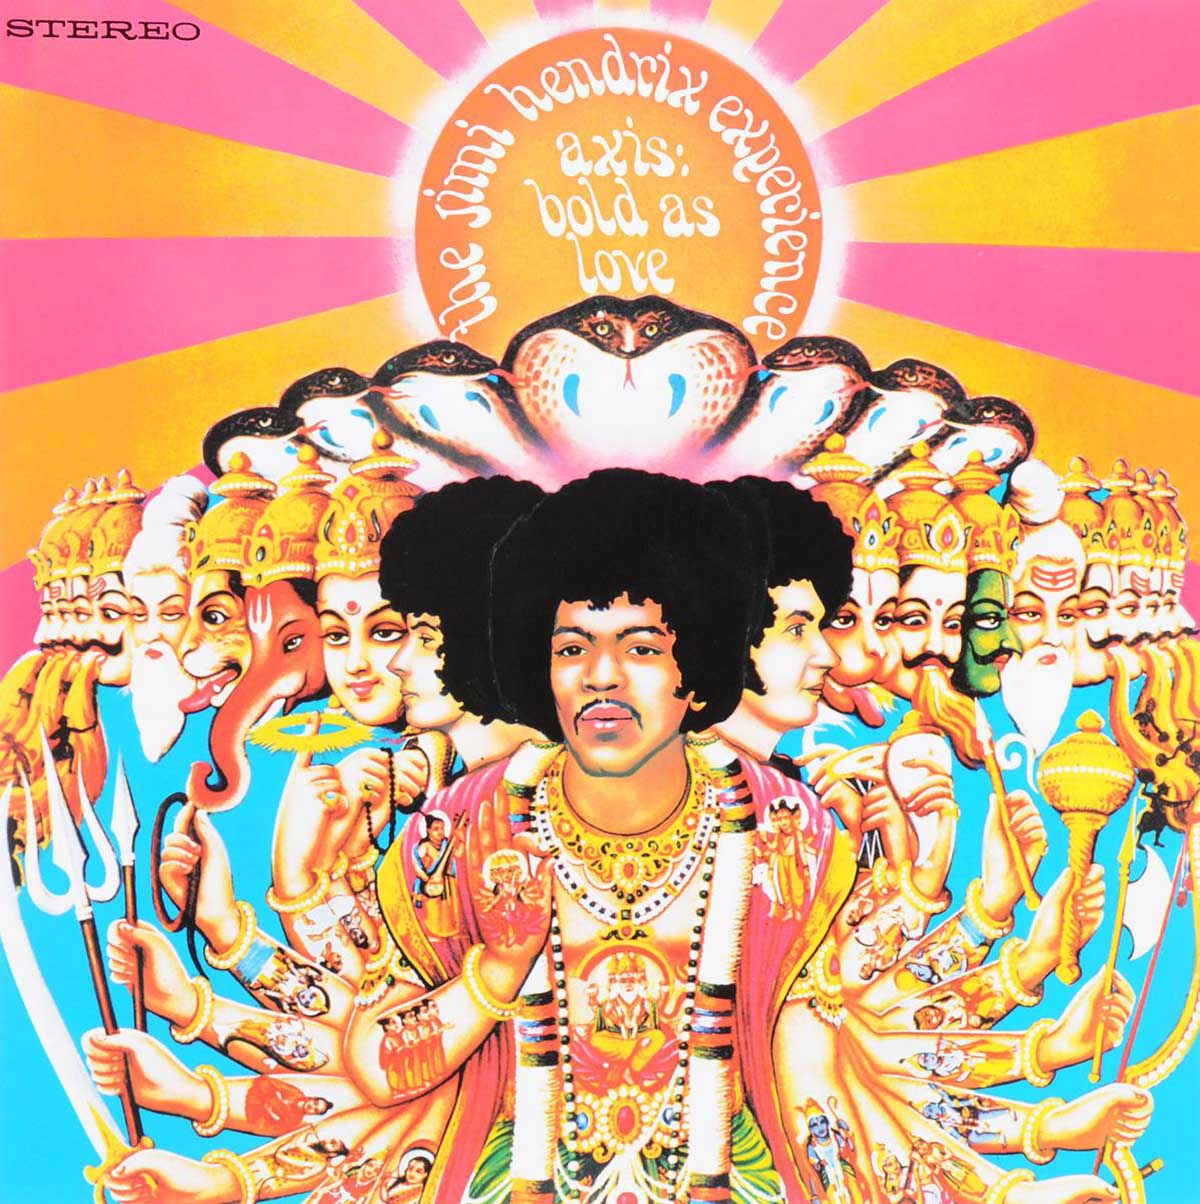 Album cover of Axis: Bold As Love (1967) by Jimi Hendrix